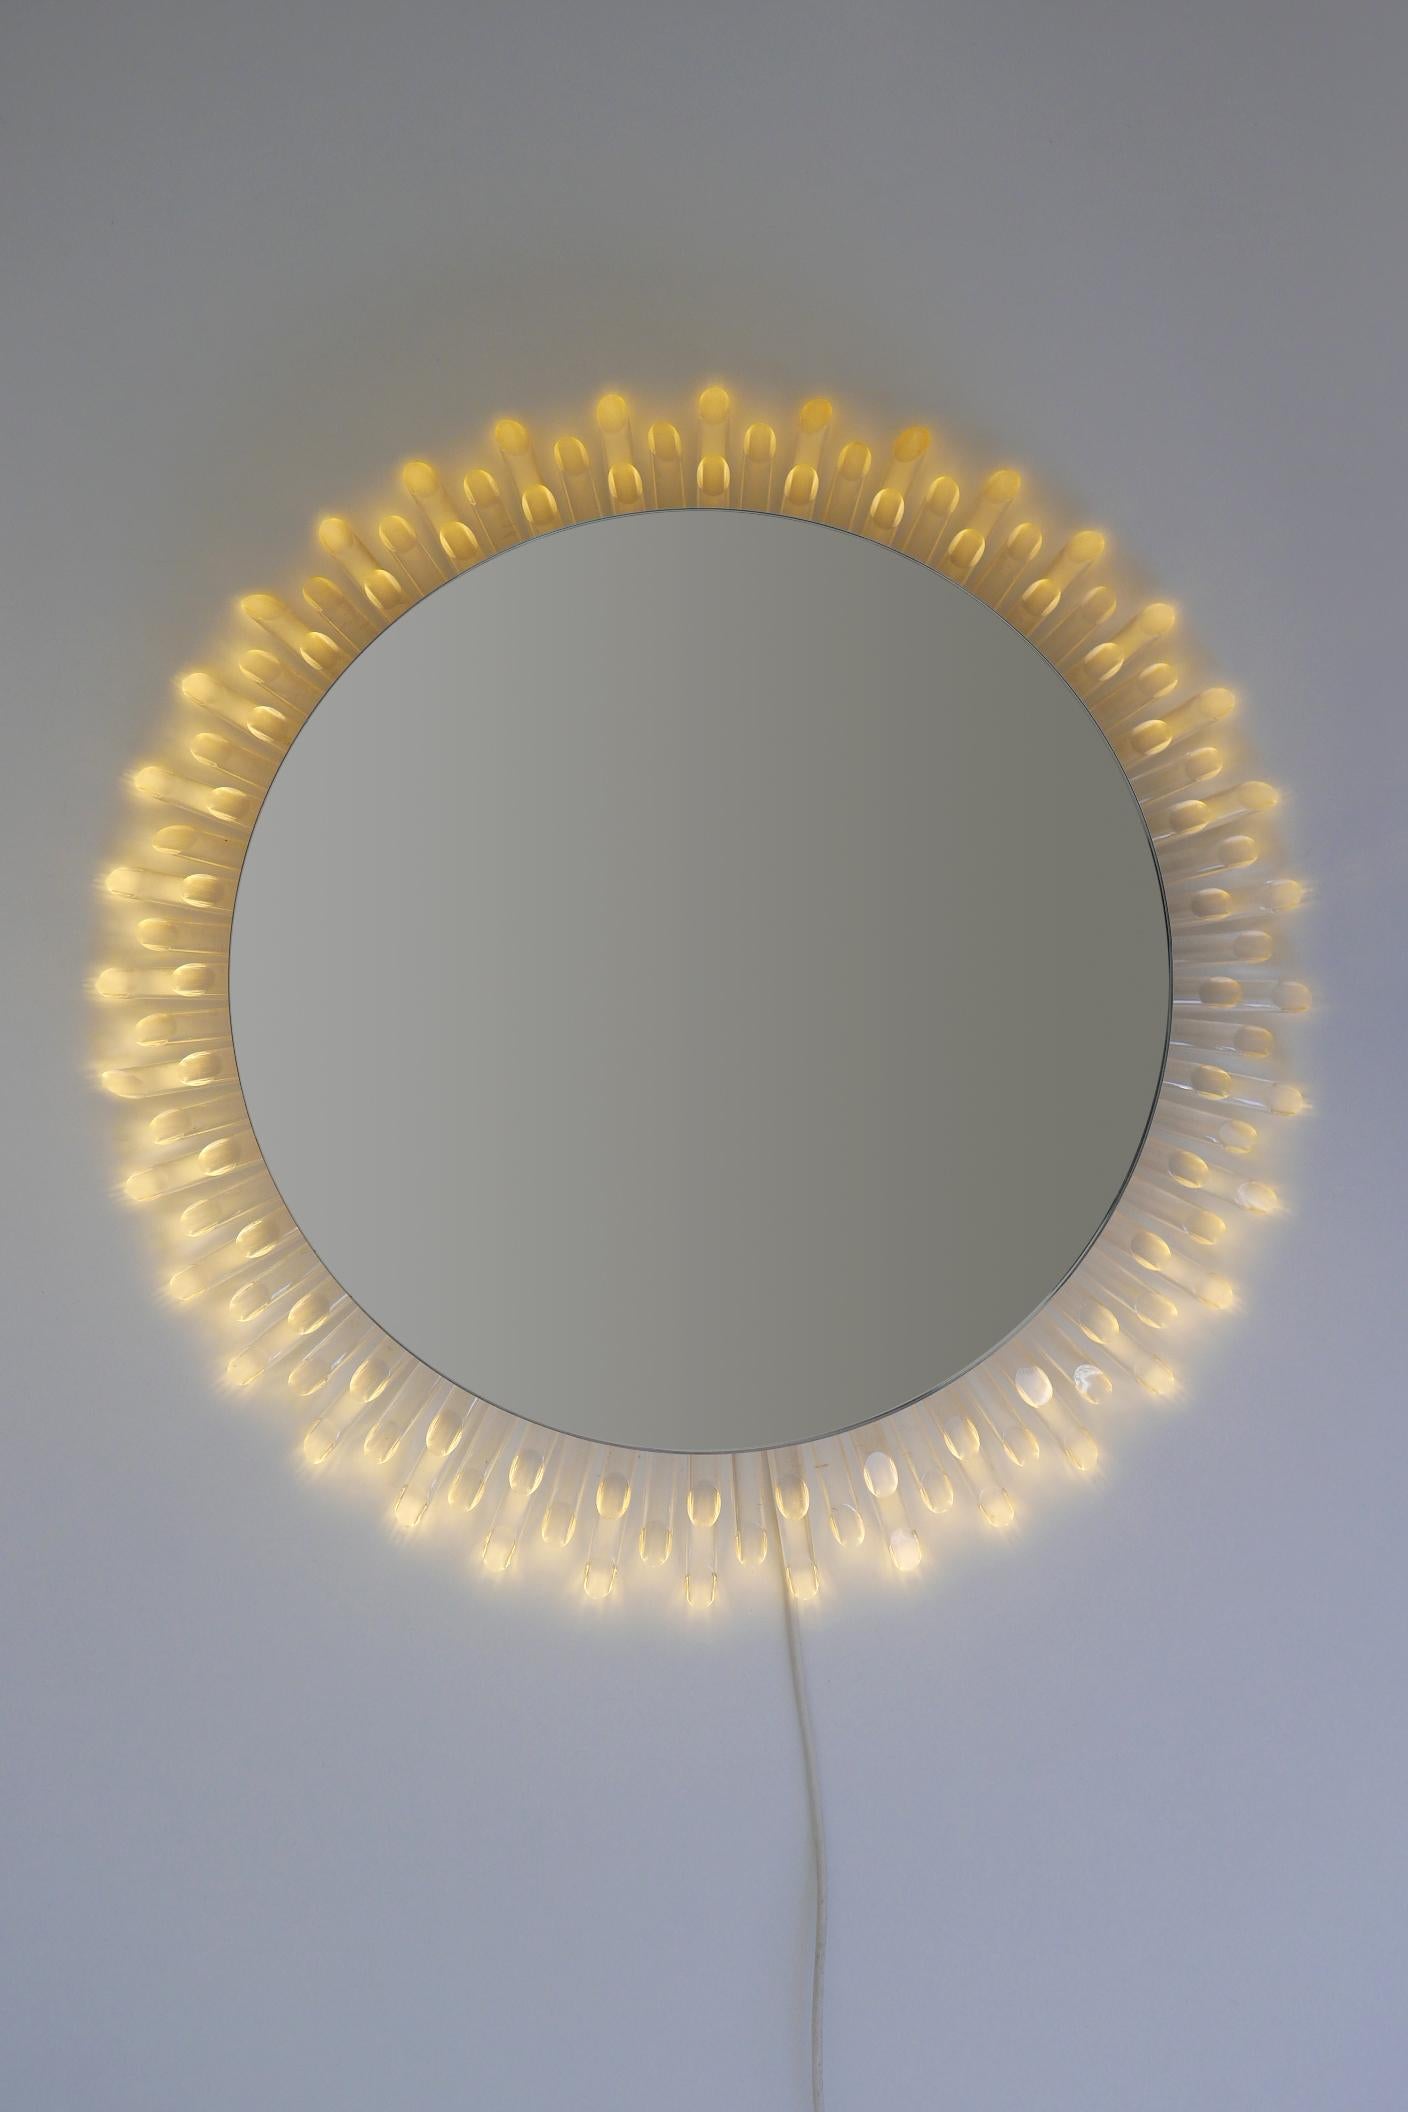 Spectacular Large Mid-Century Modern Backlit Sunburst Wall Mirror Germany 1970s For Sale 7